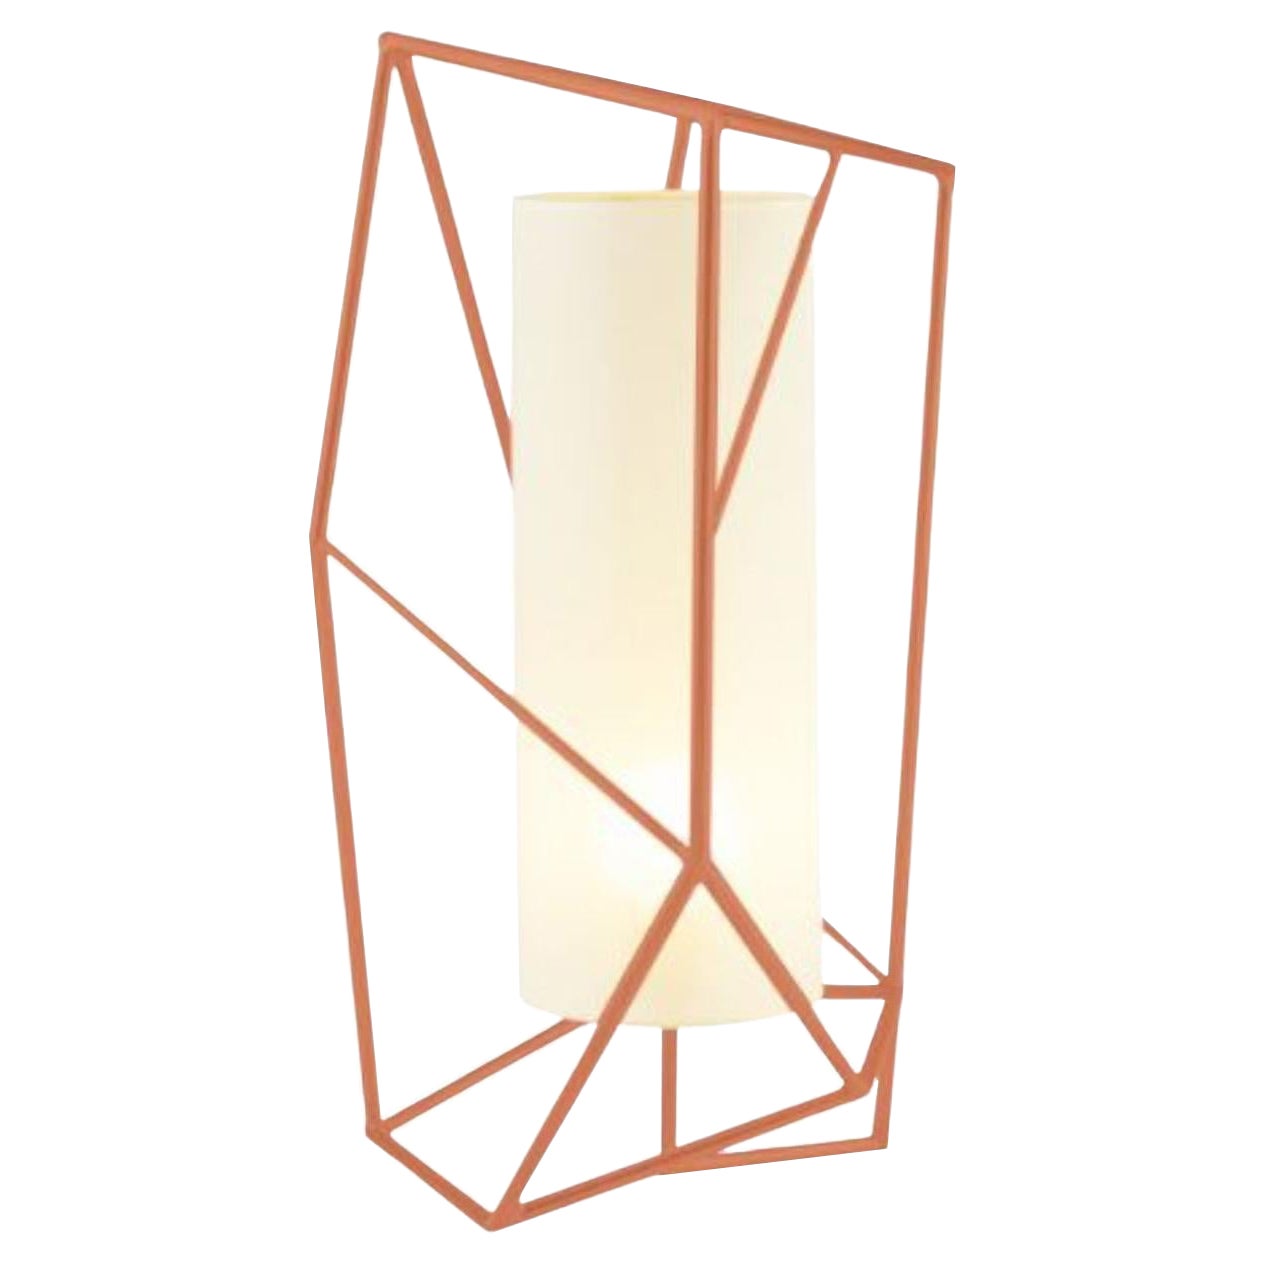 Salmon Star Table Lamp by Dooq